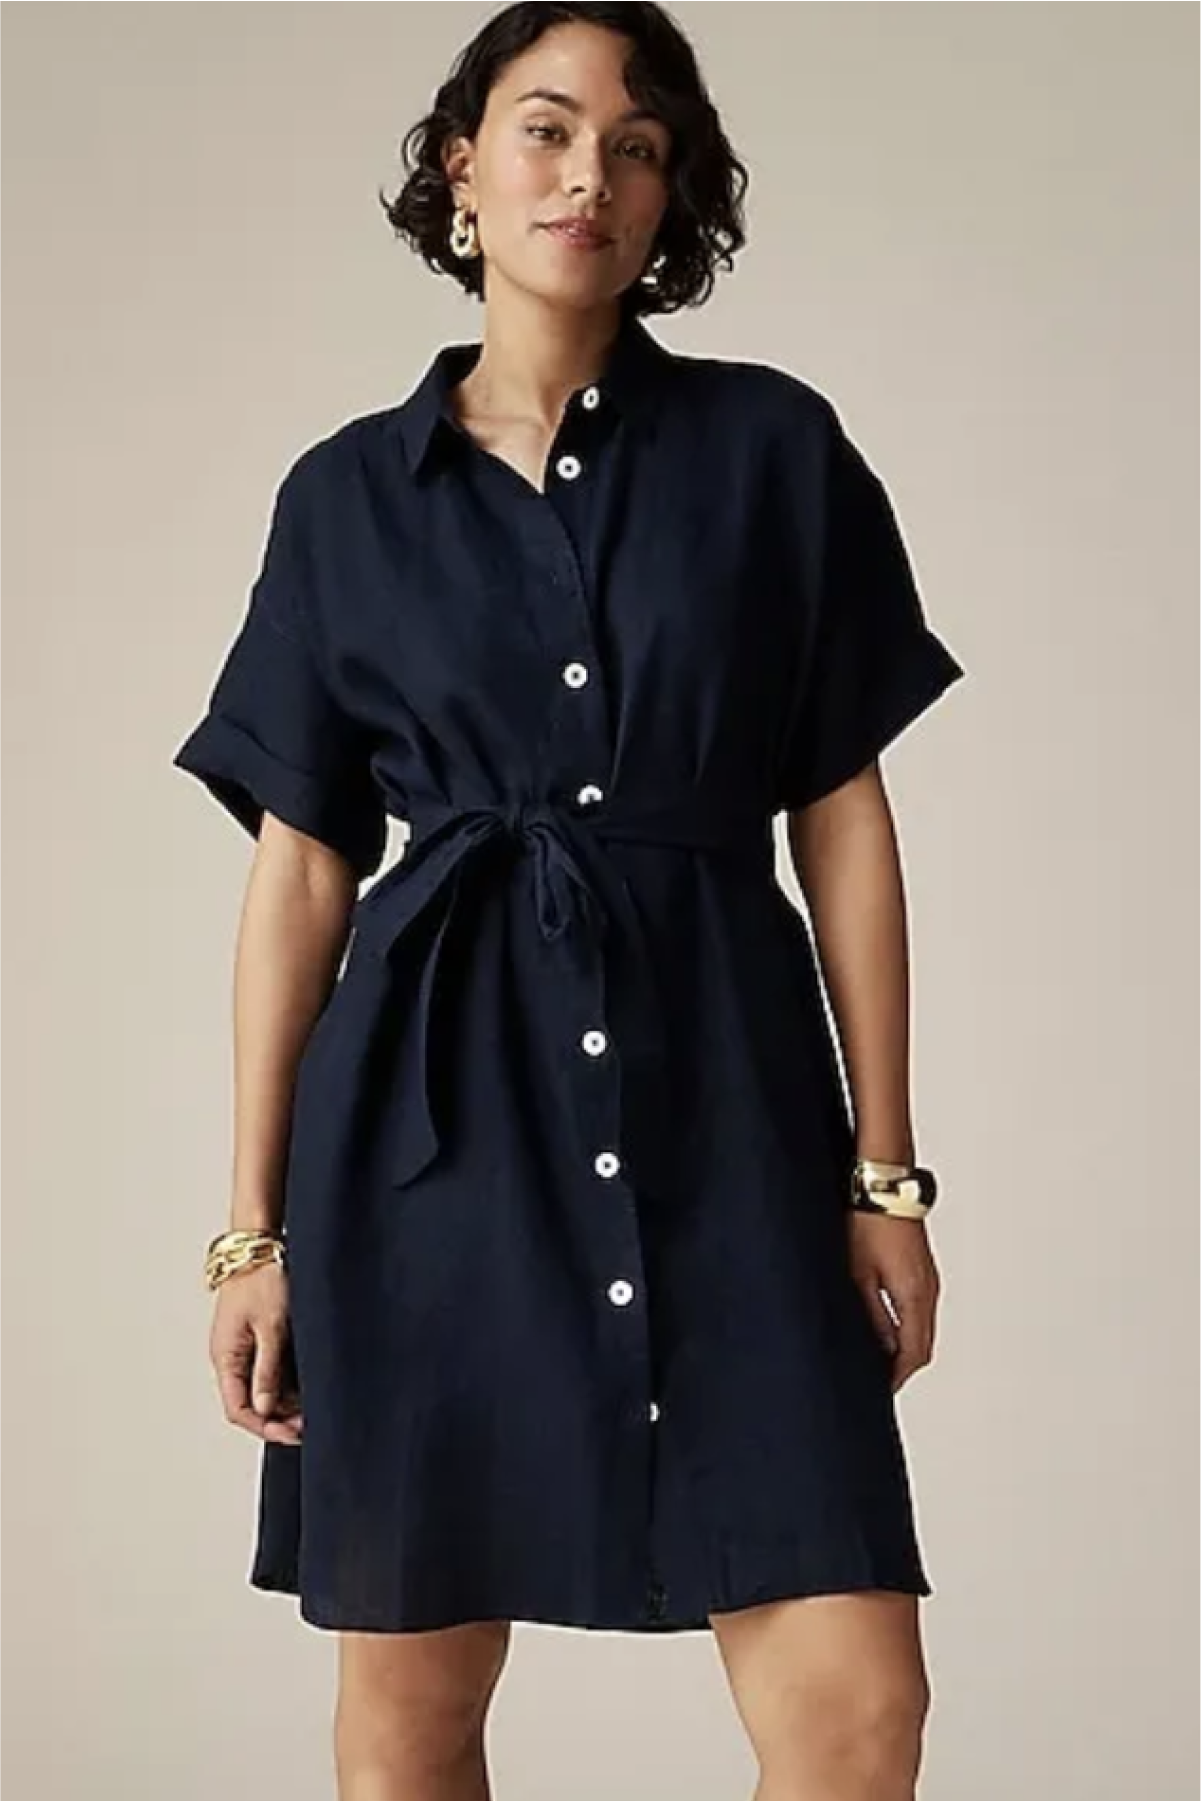 Capitaine Shirtdress in Linen